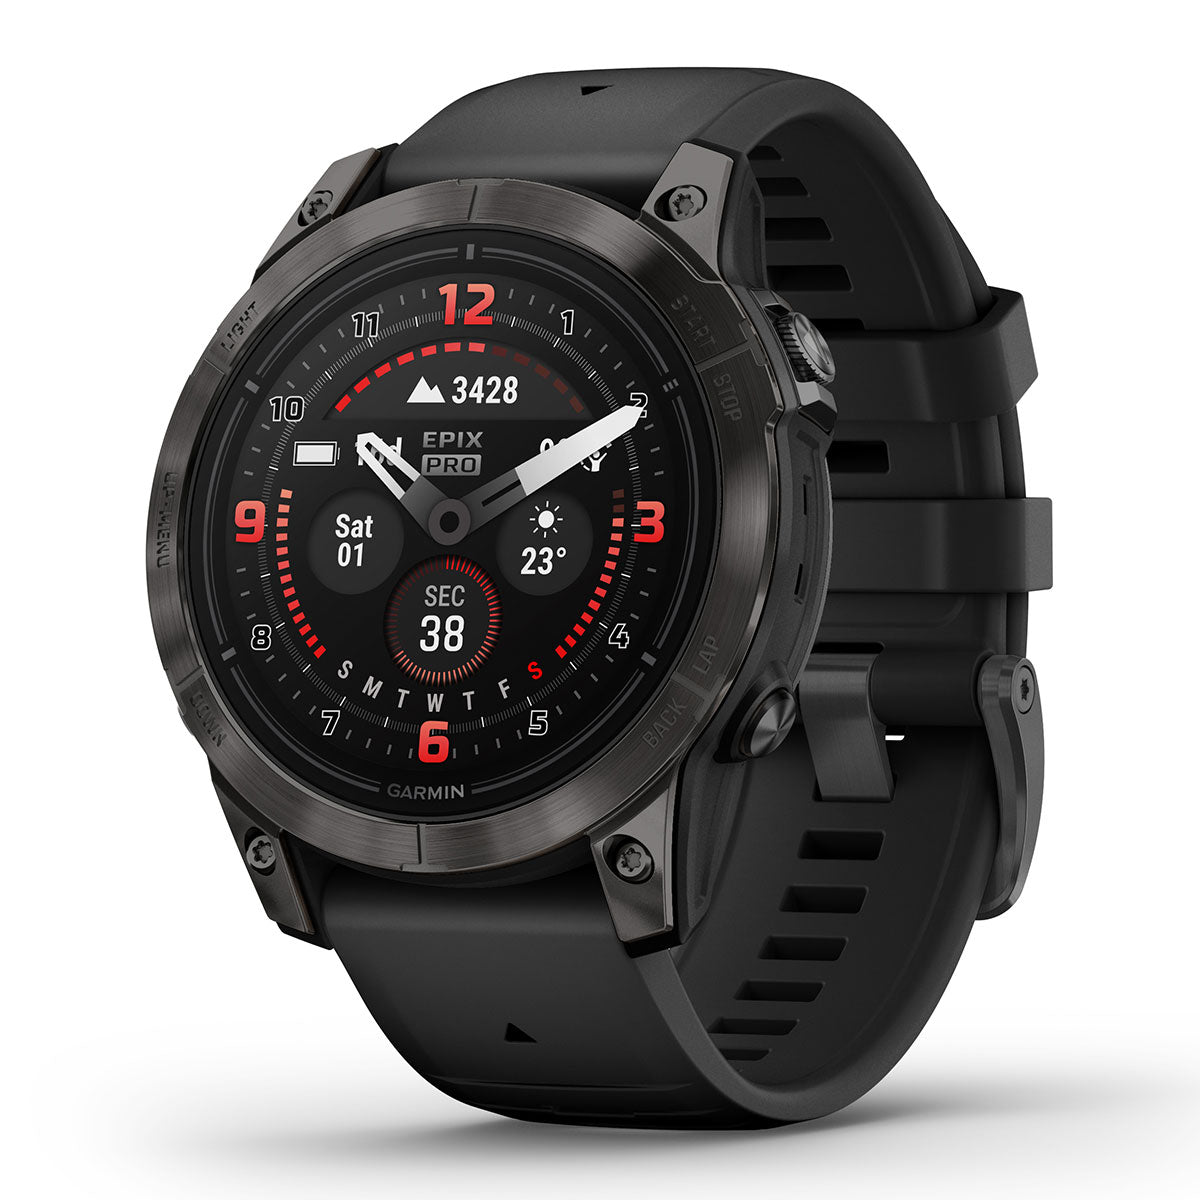 You basically don't need to charge this Garmin smartwatch